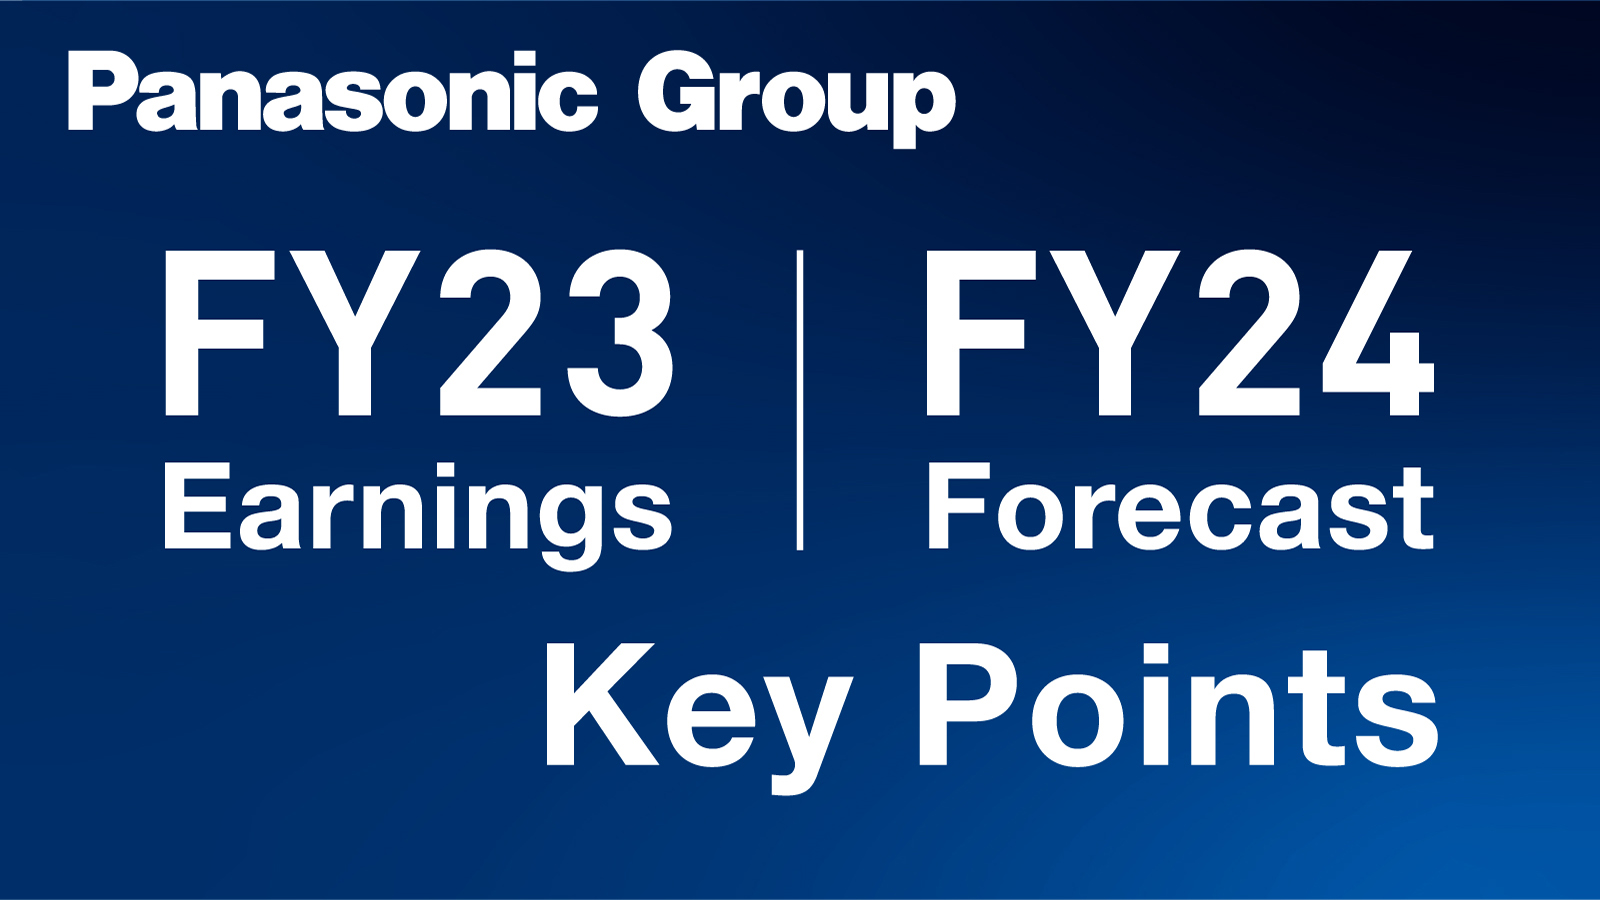 Key Points: Panasonic Group FY23 Earnings and FY24 Forecast